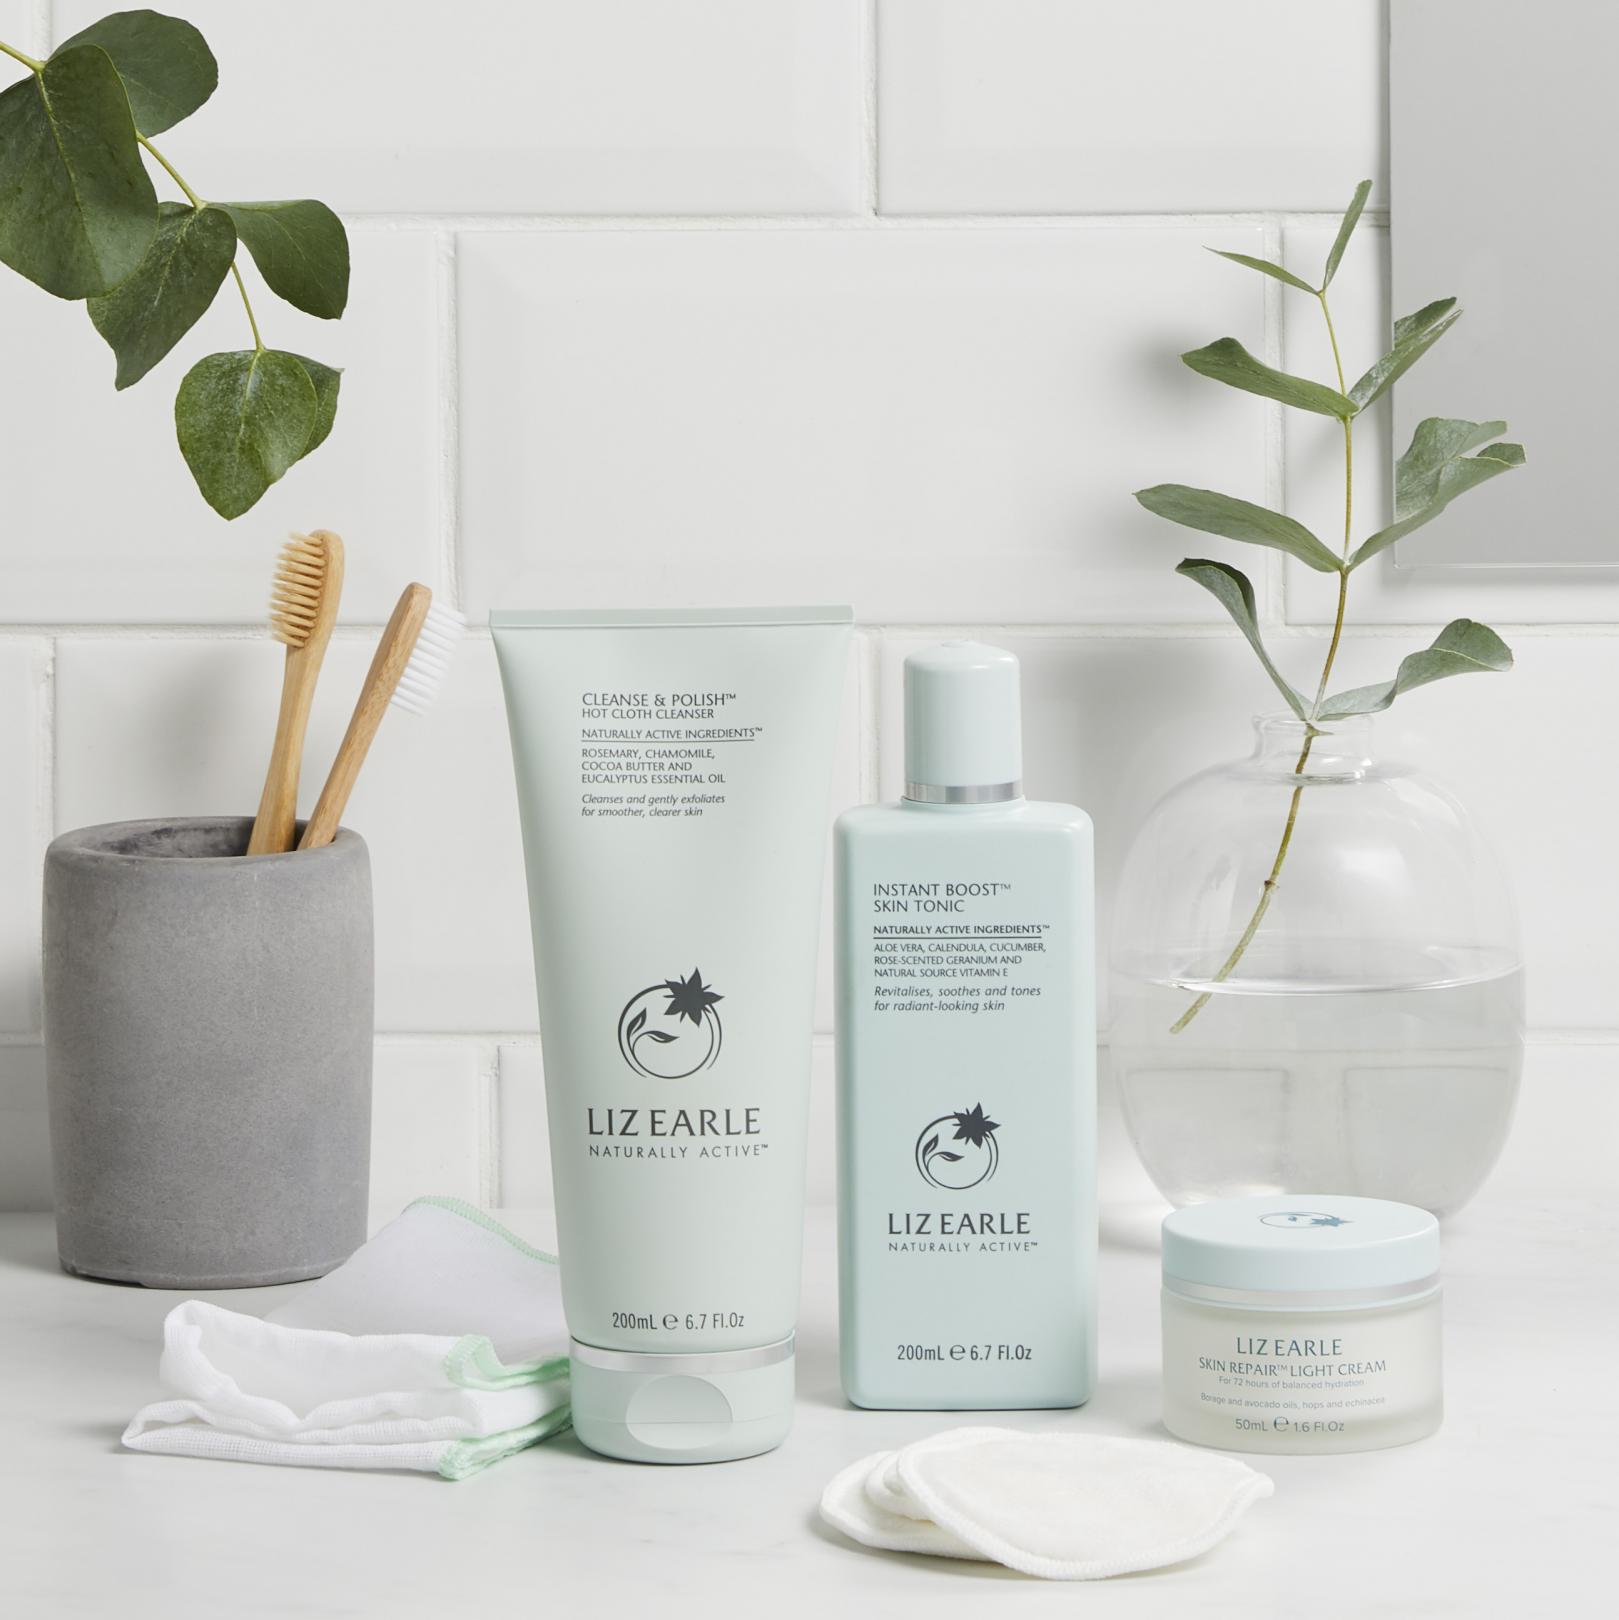 Liz Earle products